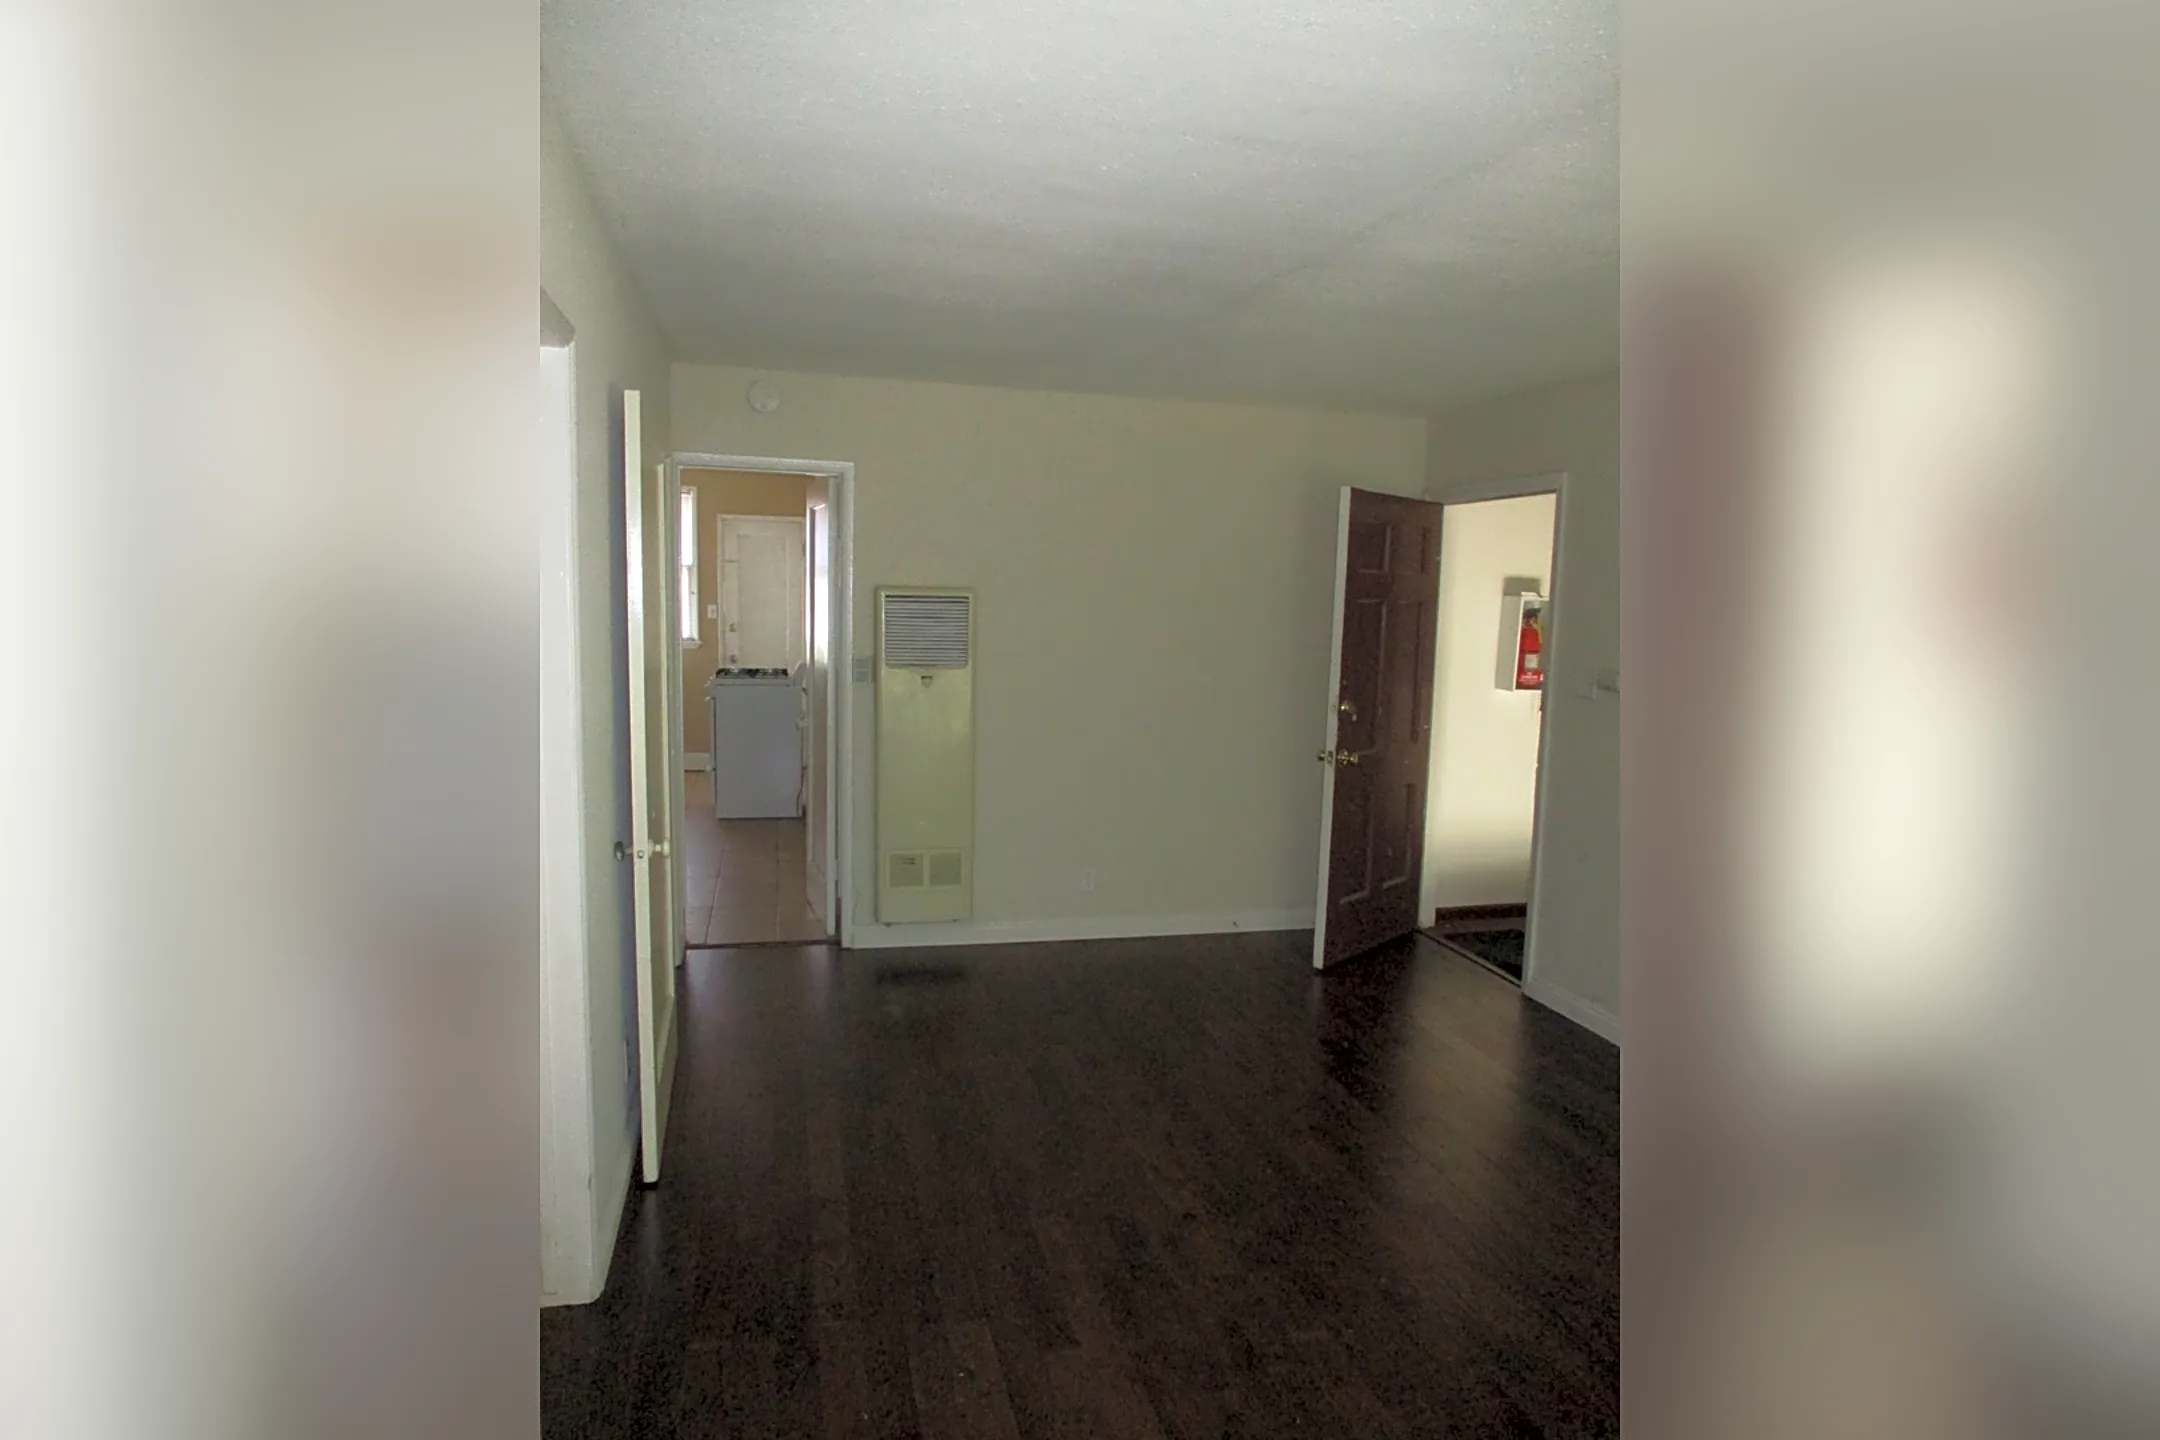 4620 N Banner Dr | Long Beach, CA Houses for Rent | Rent.